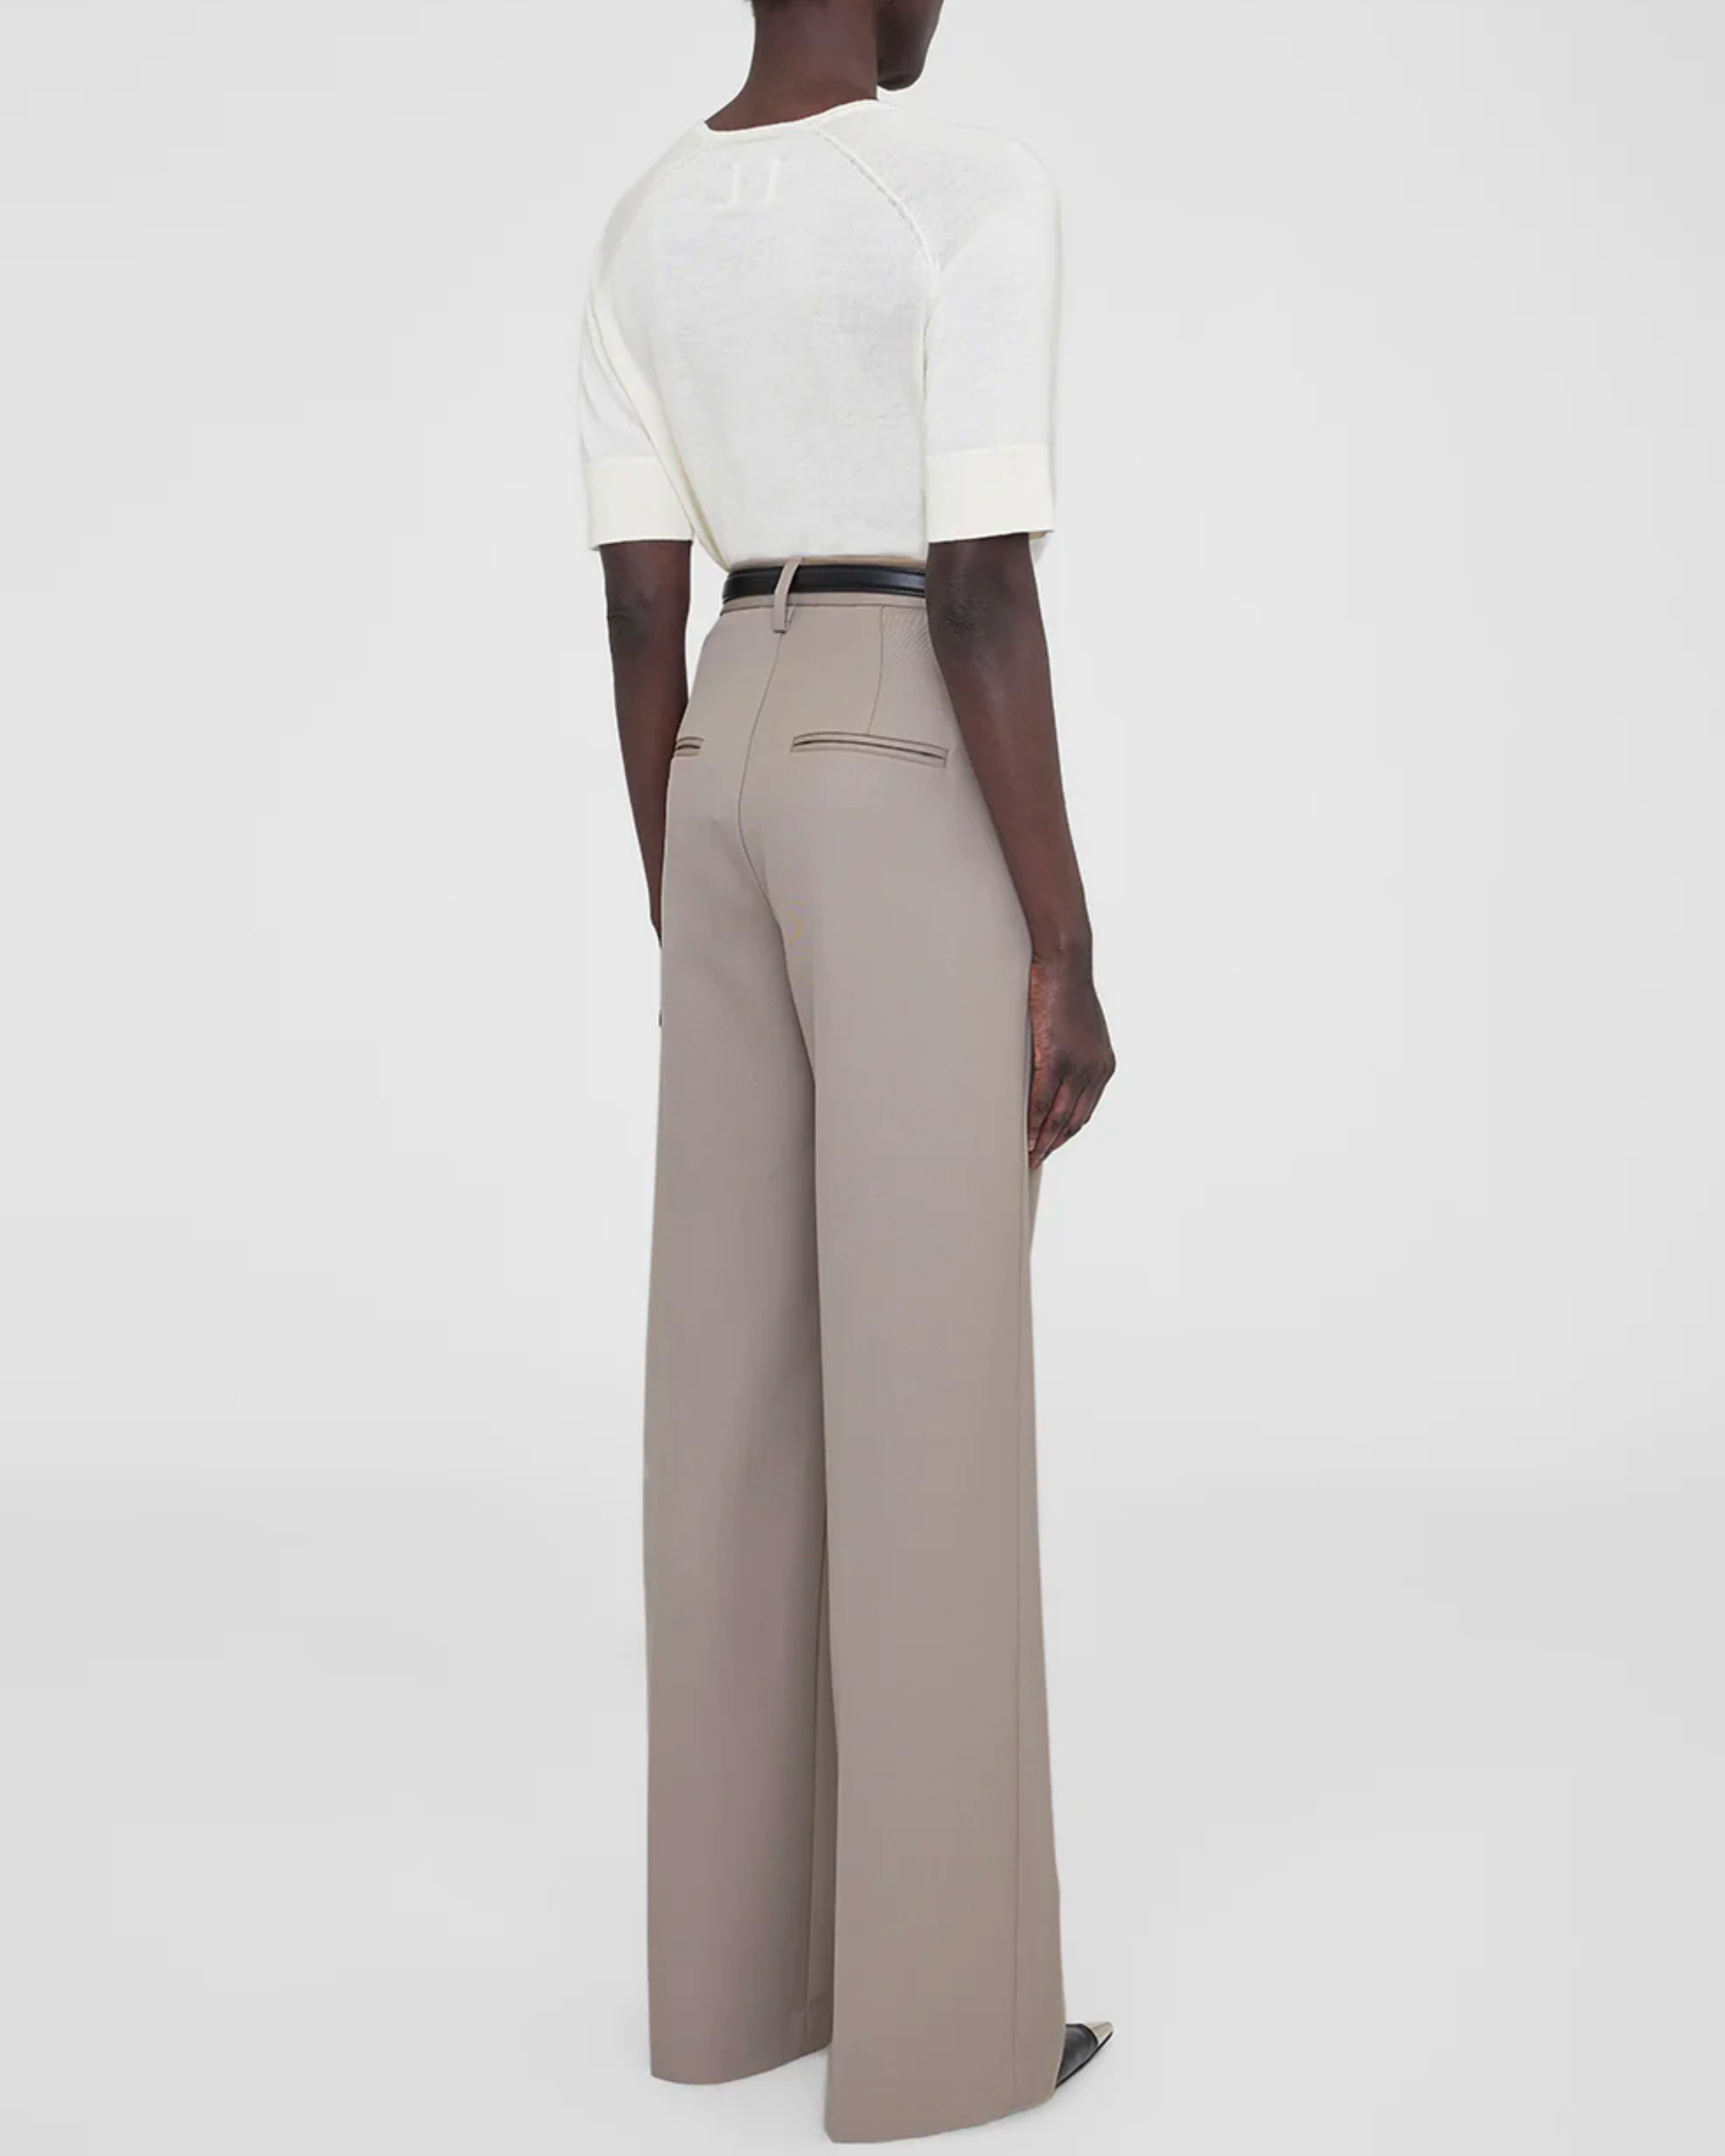 Anine Bing Carrie Pant in Taupe